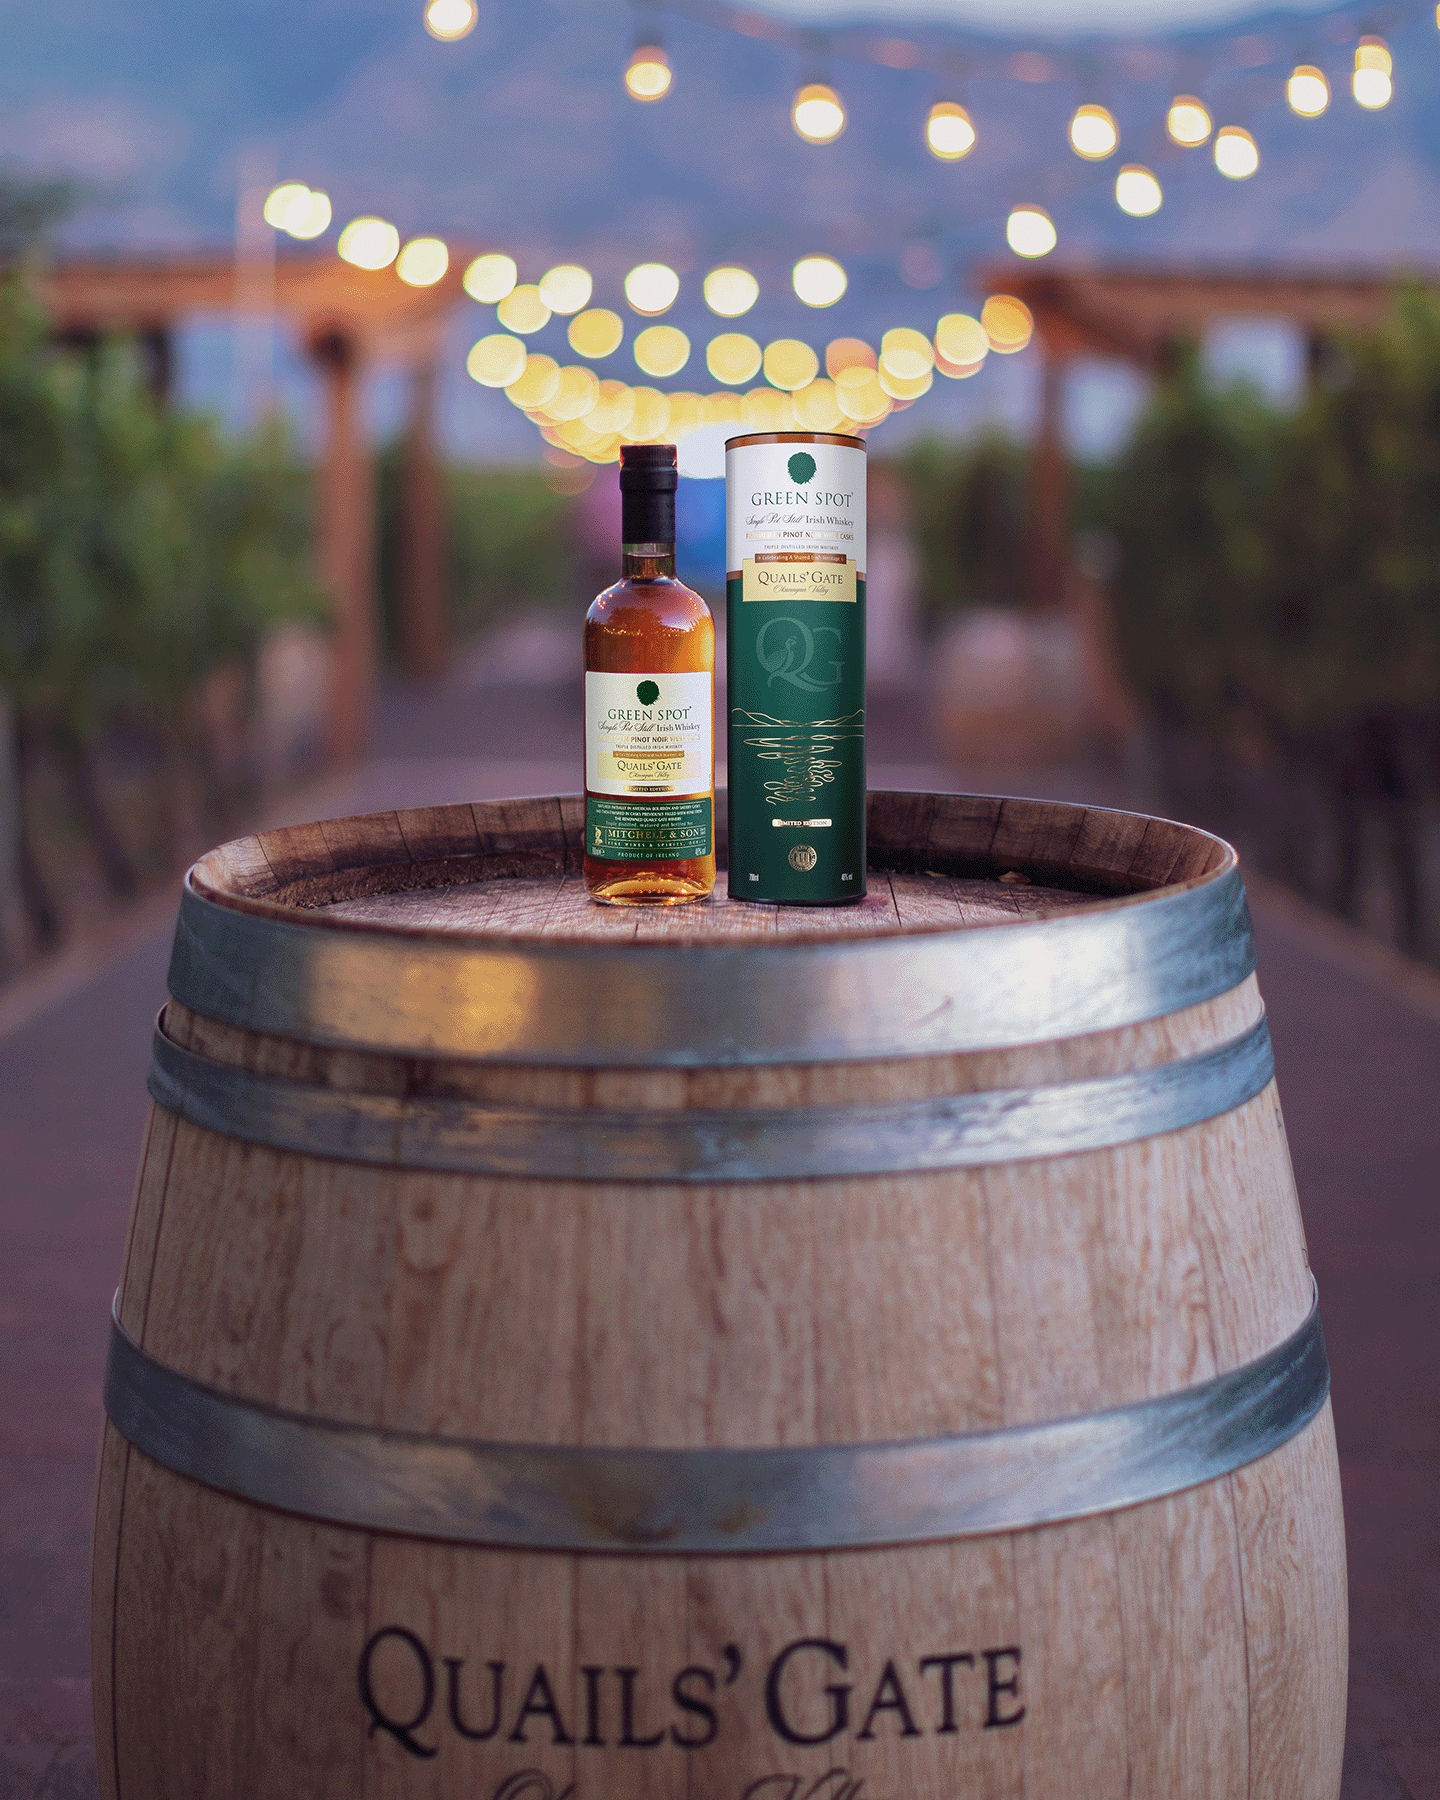 Green Spot Quails Gate Whiskey on top of a barrel with fairy lights and an alleyway in the background